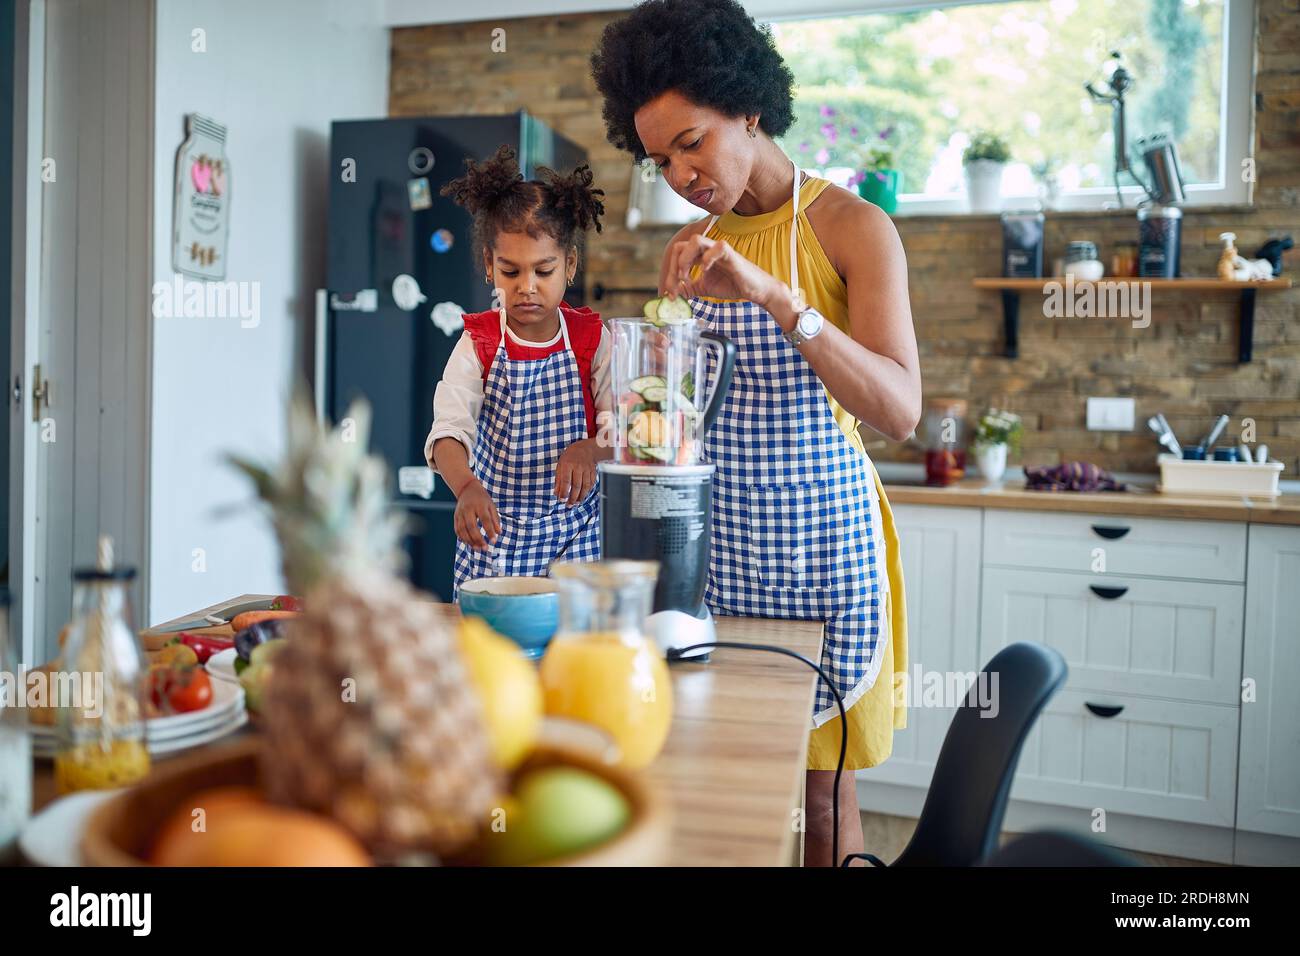 Mother and her young daughter coming together to prepare a healthy meal. Immersed in the process, they are seen adding fresh vegetables to a blender t Stock Photo